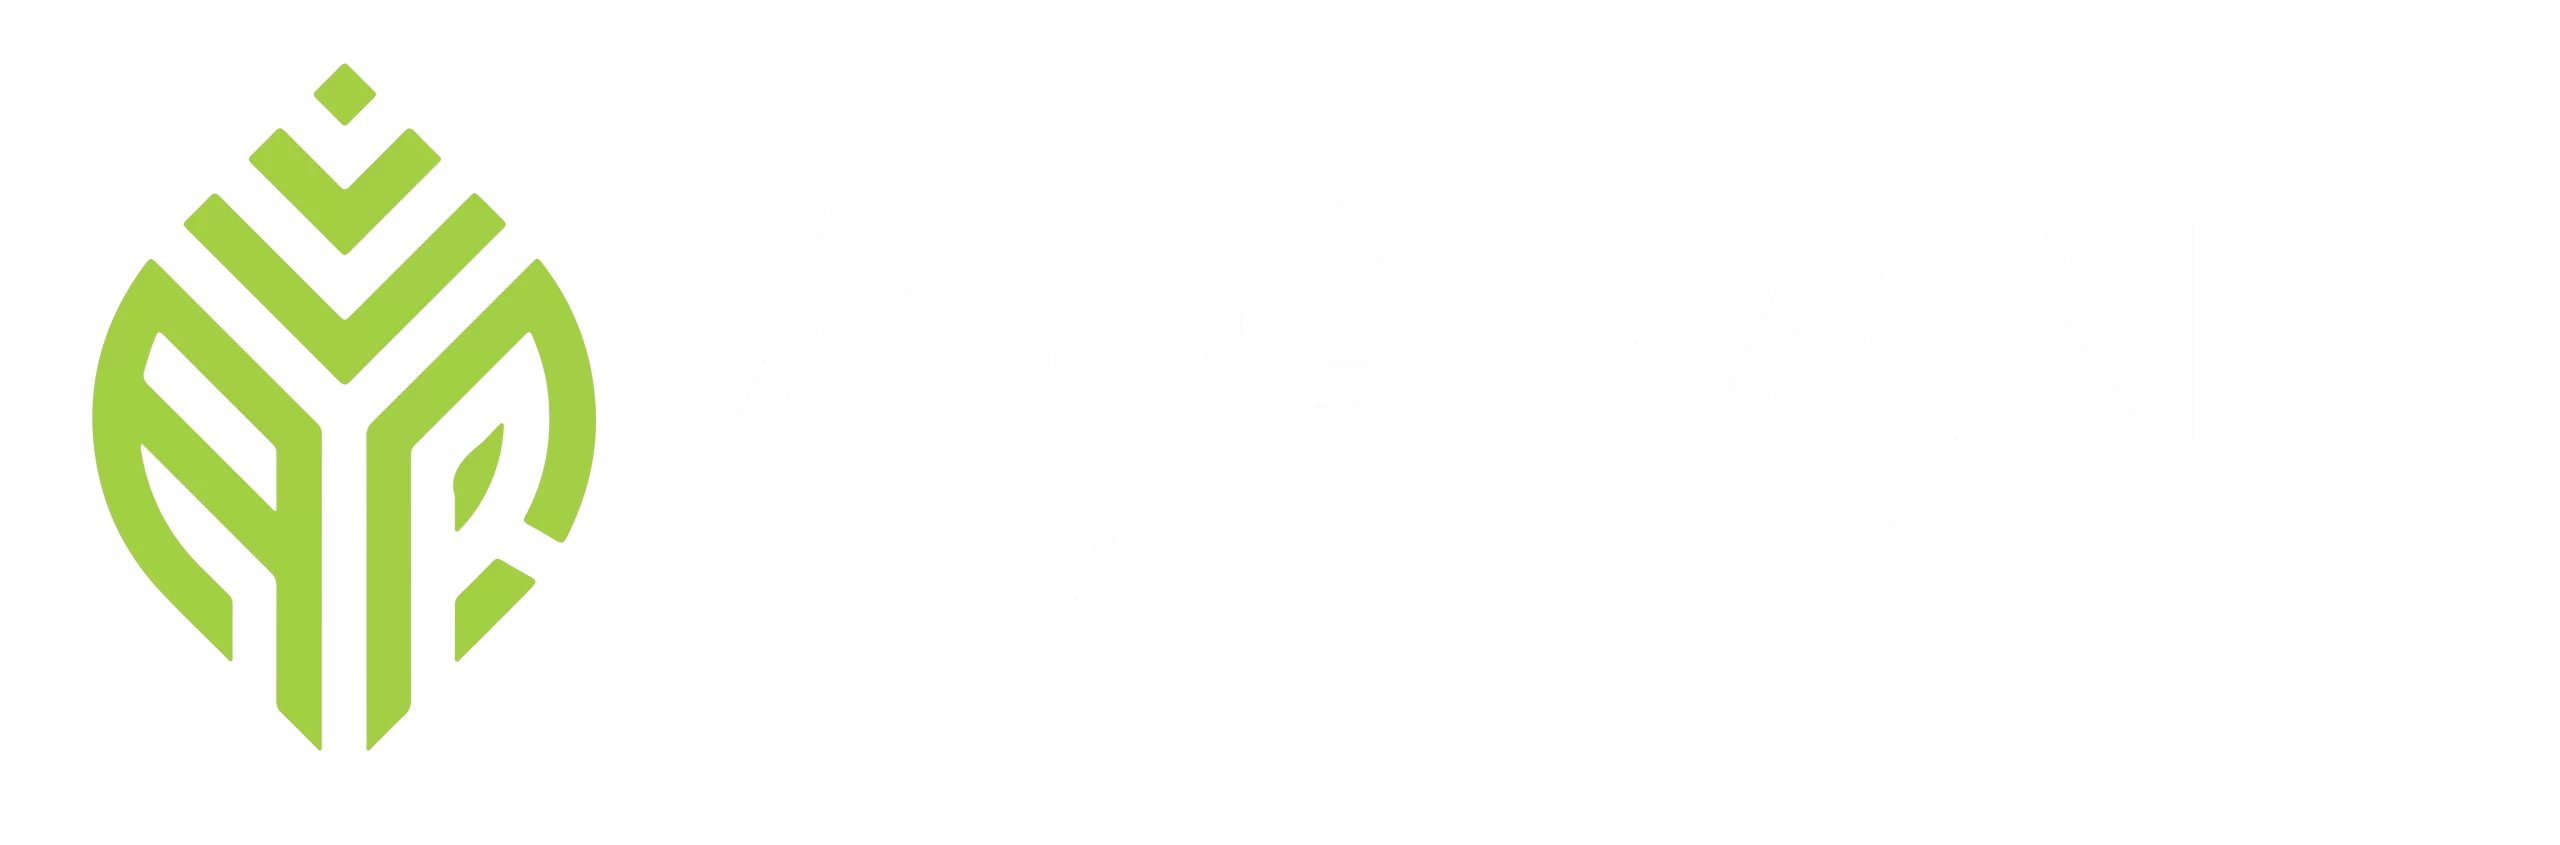 Afghan Relief